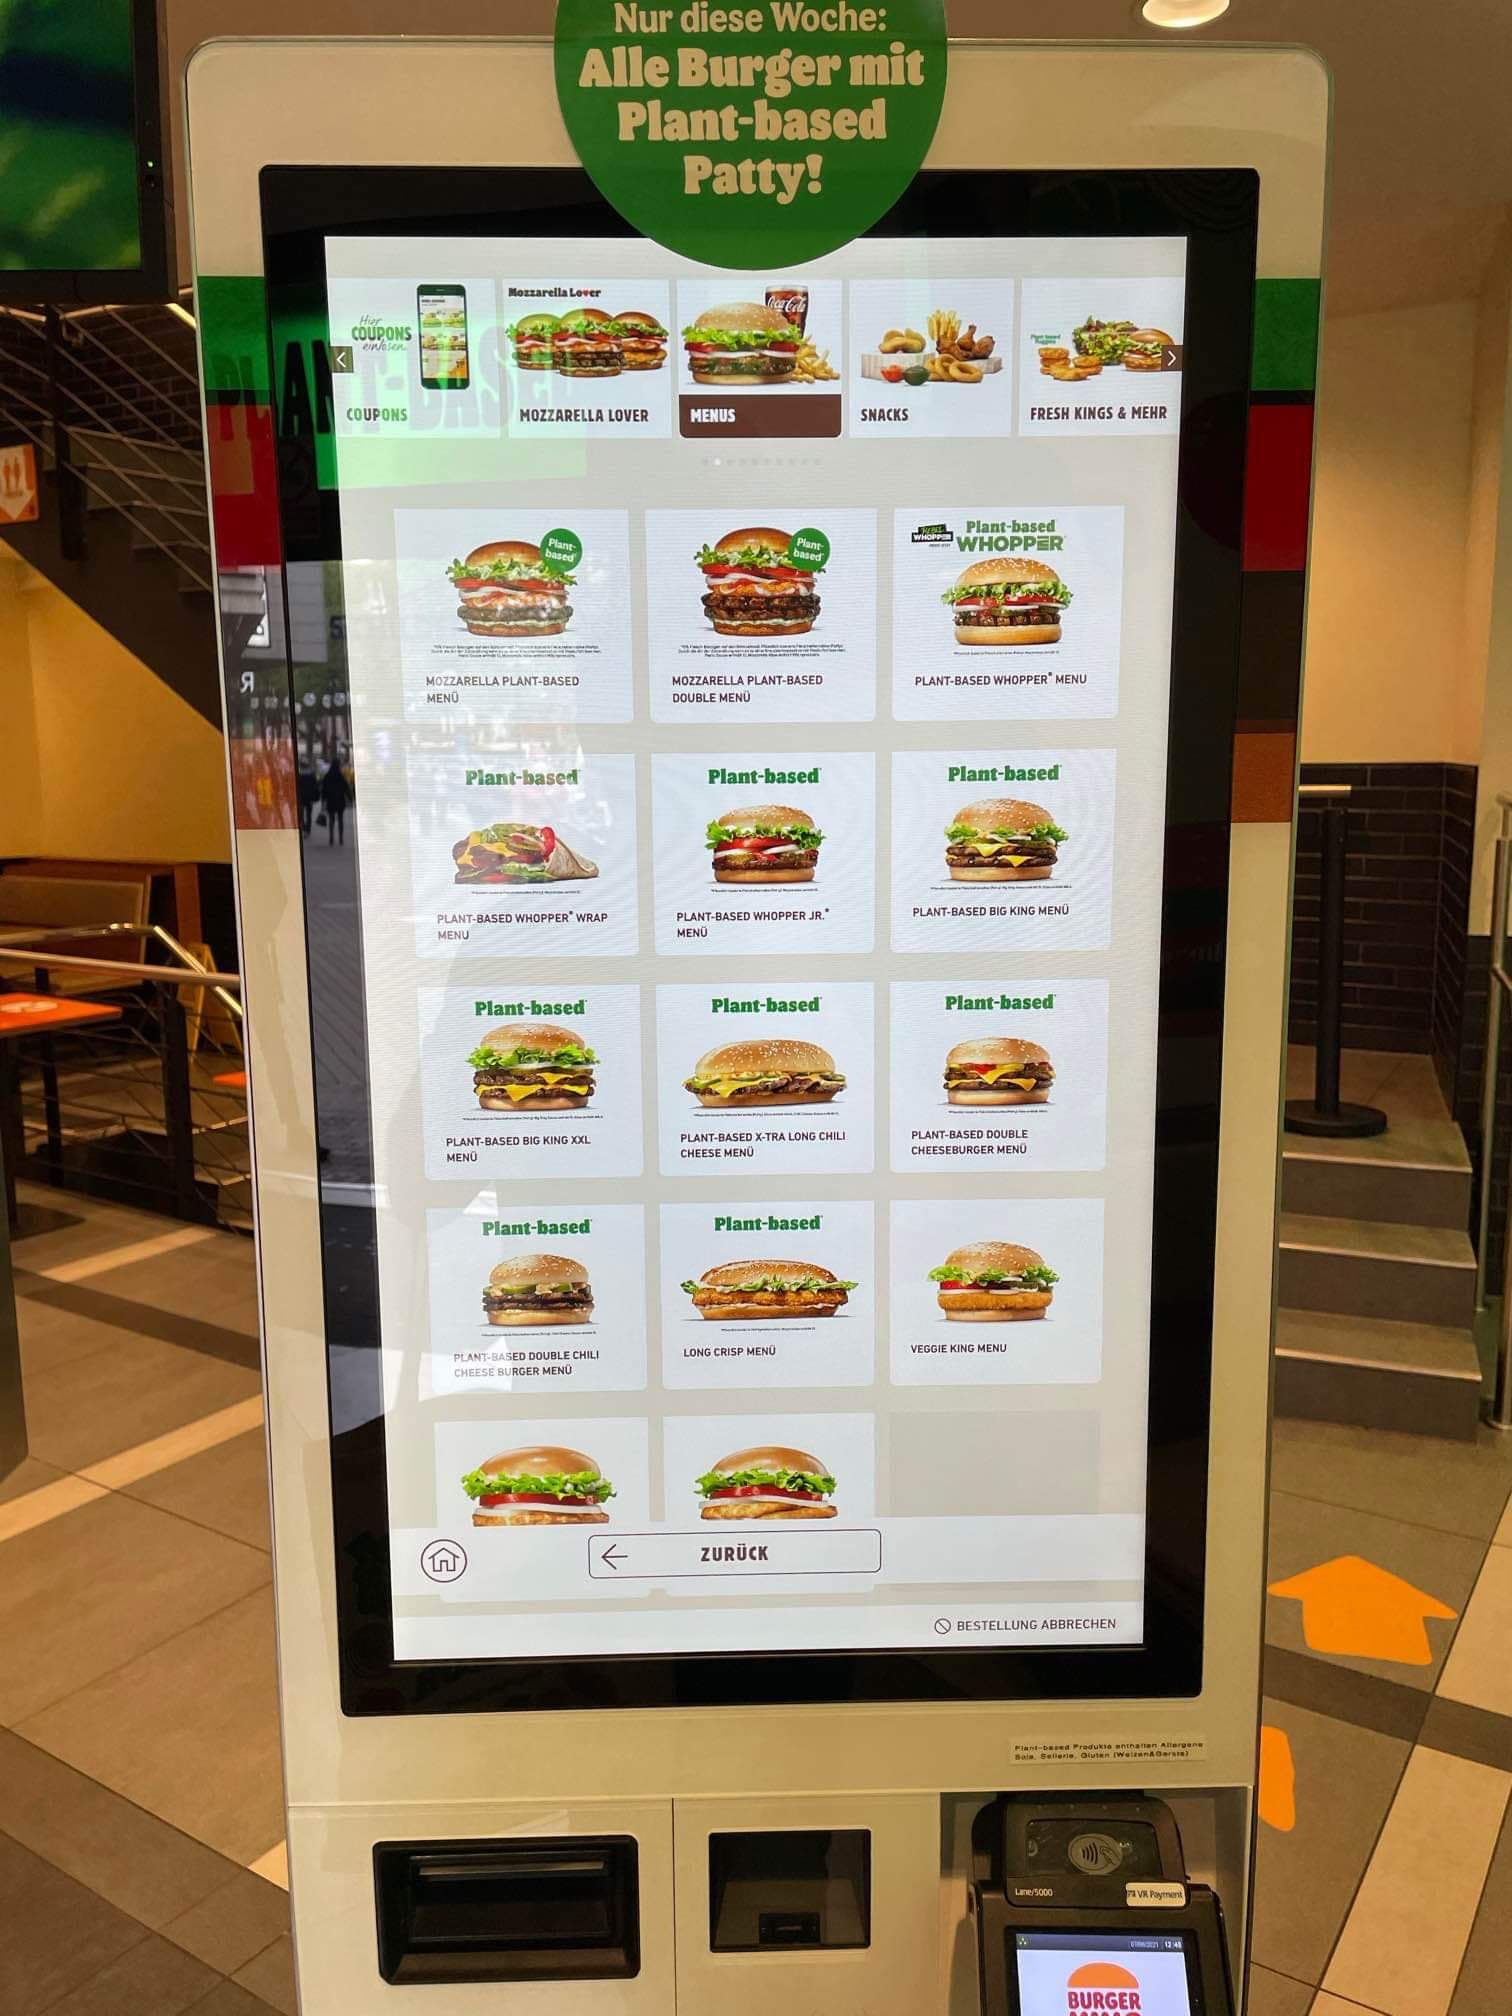 The collaboration has meant that Burger King venues across the world such as Mexico, China, Germany, and the UK are now able to offer plant-based alternatives to their customers.